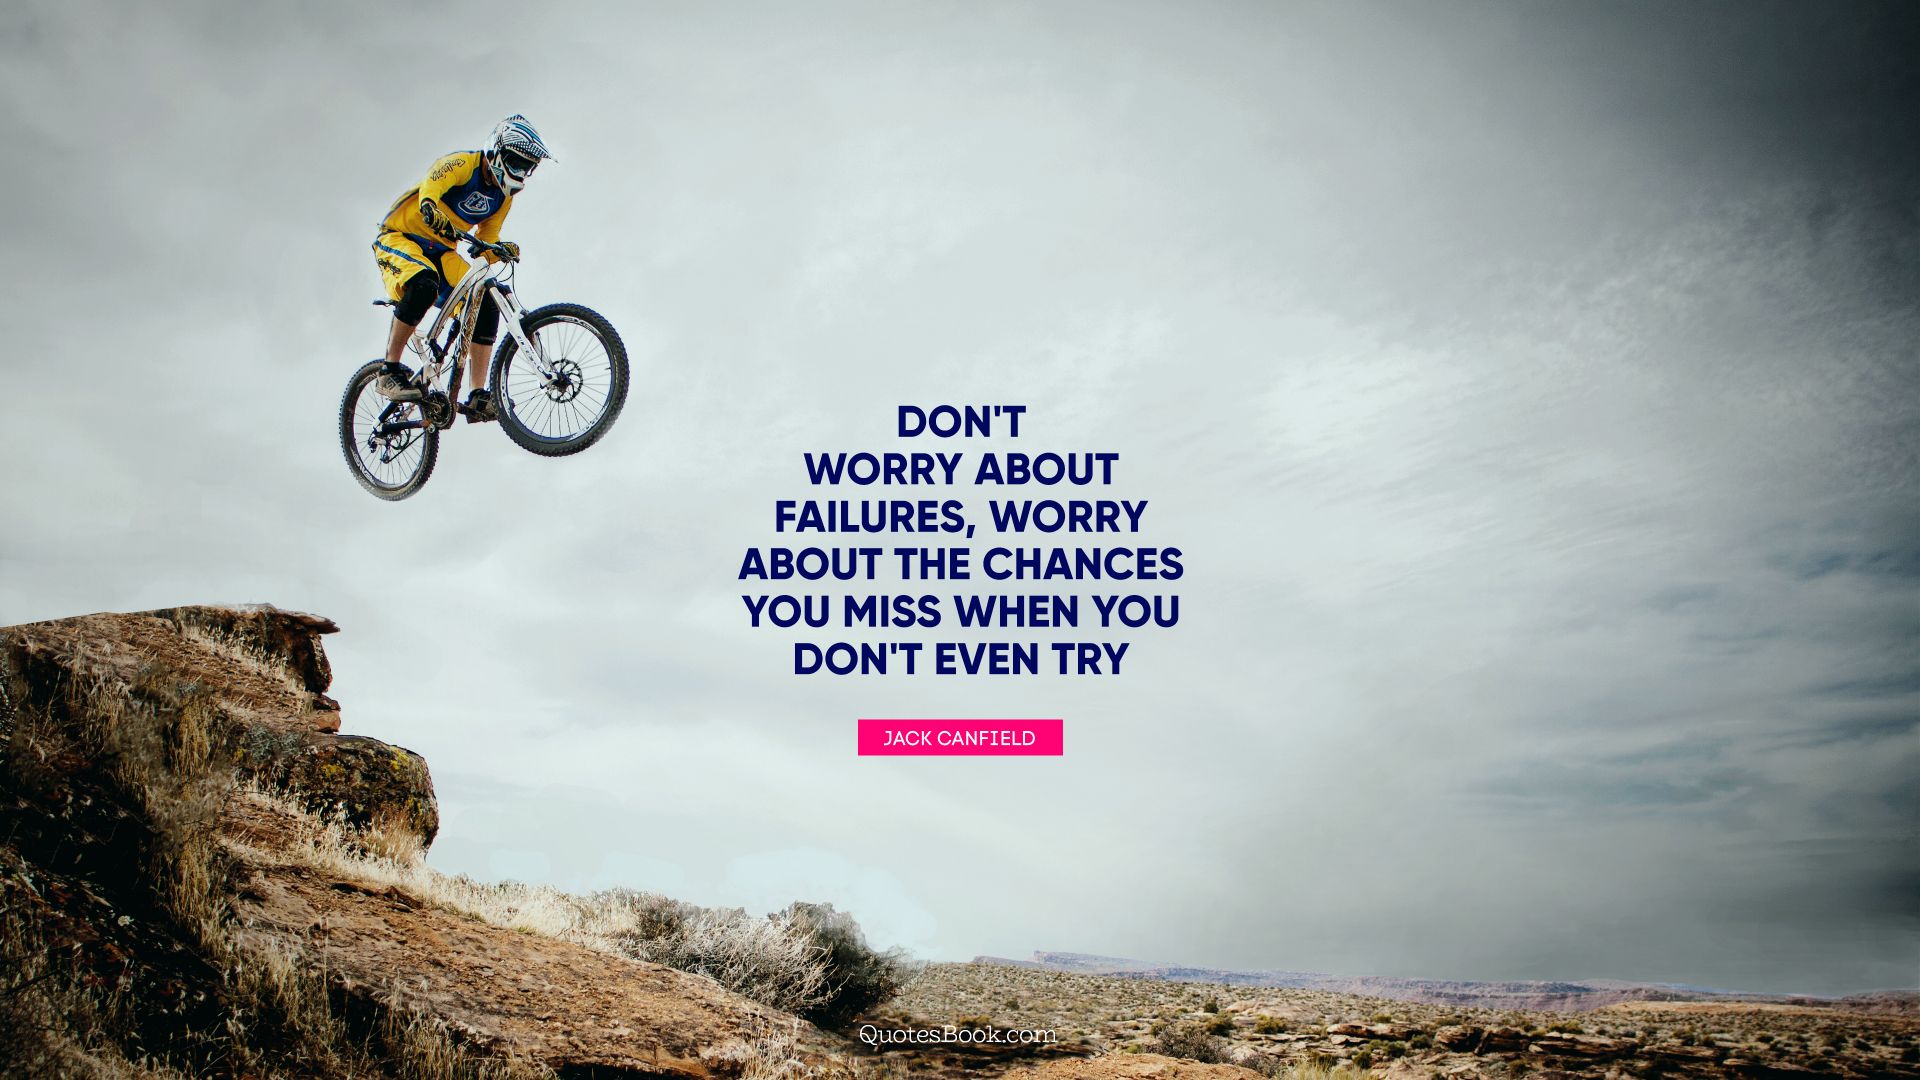 Don't worry about failures, worry about the chances you miss when you don't even try. - Quote by Jack Canfield